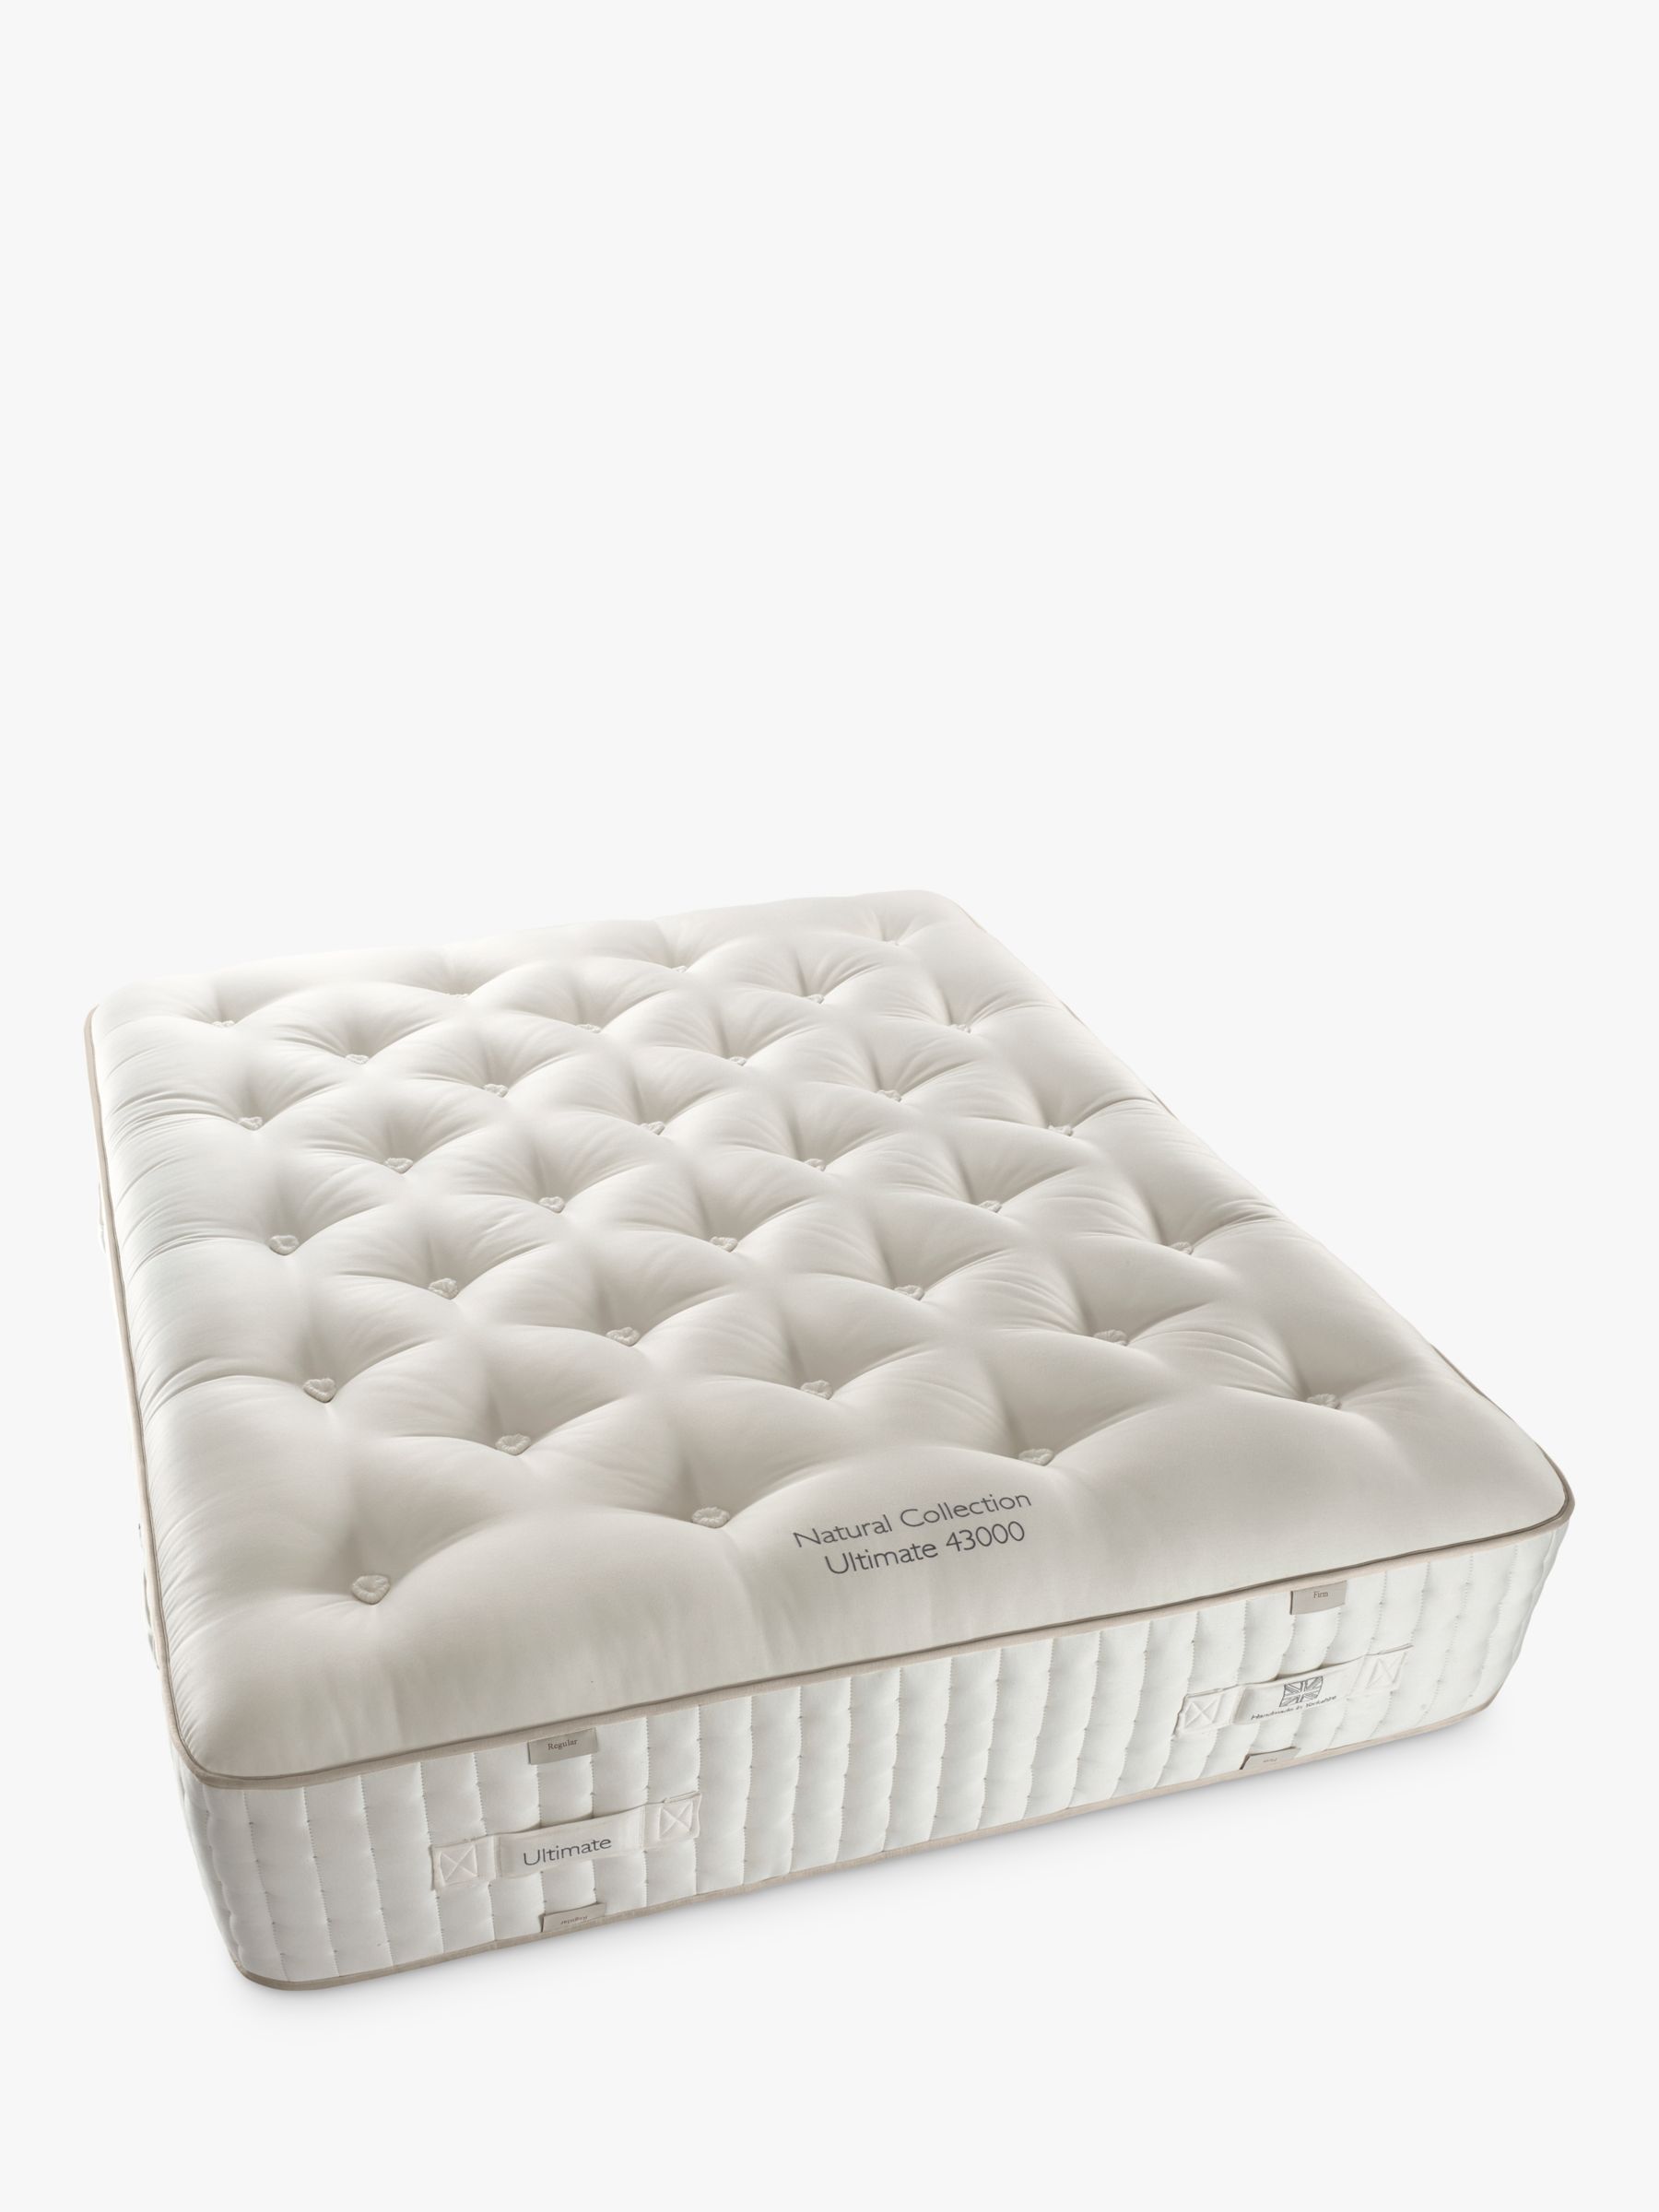 Photo of John lewis ultimate natural collection 43000 double regular tension pocket spring mattress